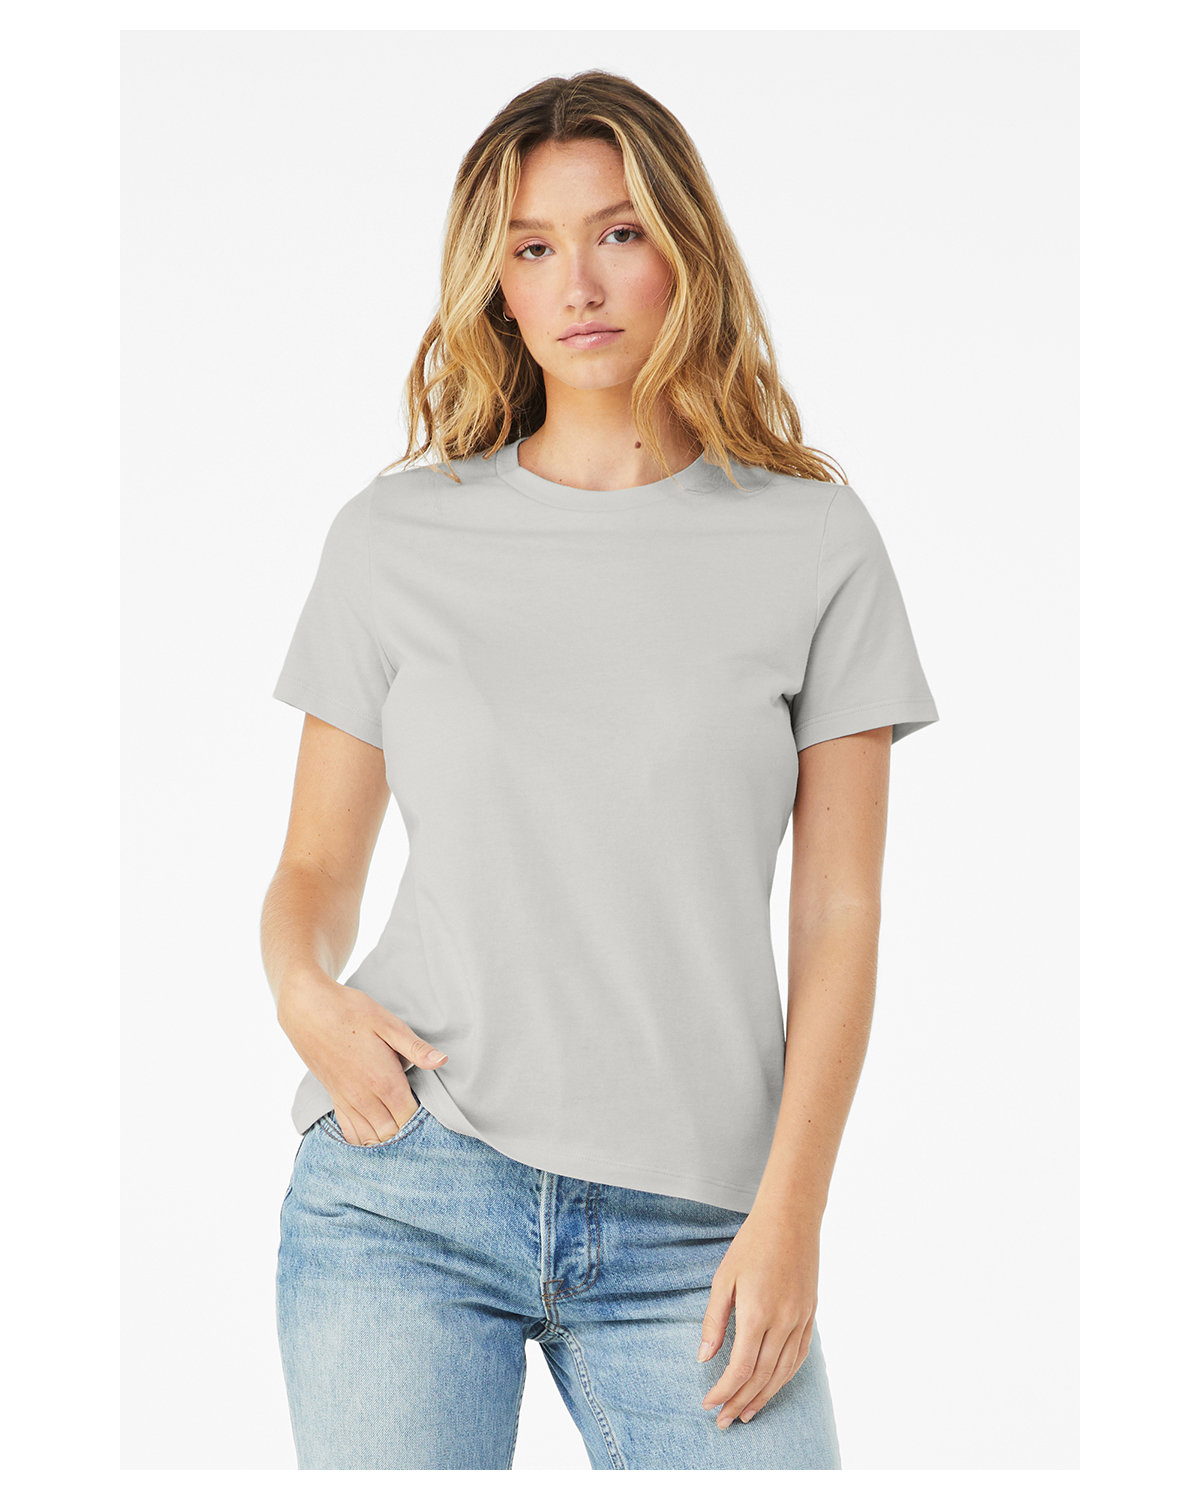 Bella + Canvas Ladies' Relaxed Jersey Short-Sleeve T-Shirt SILVER 